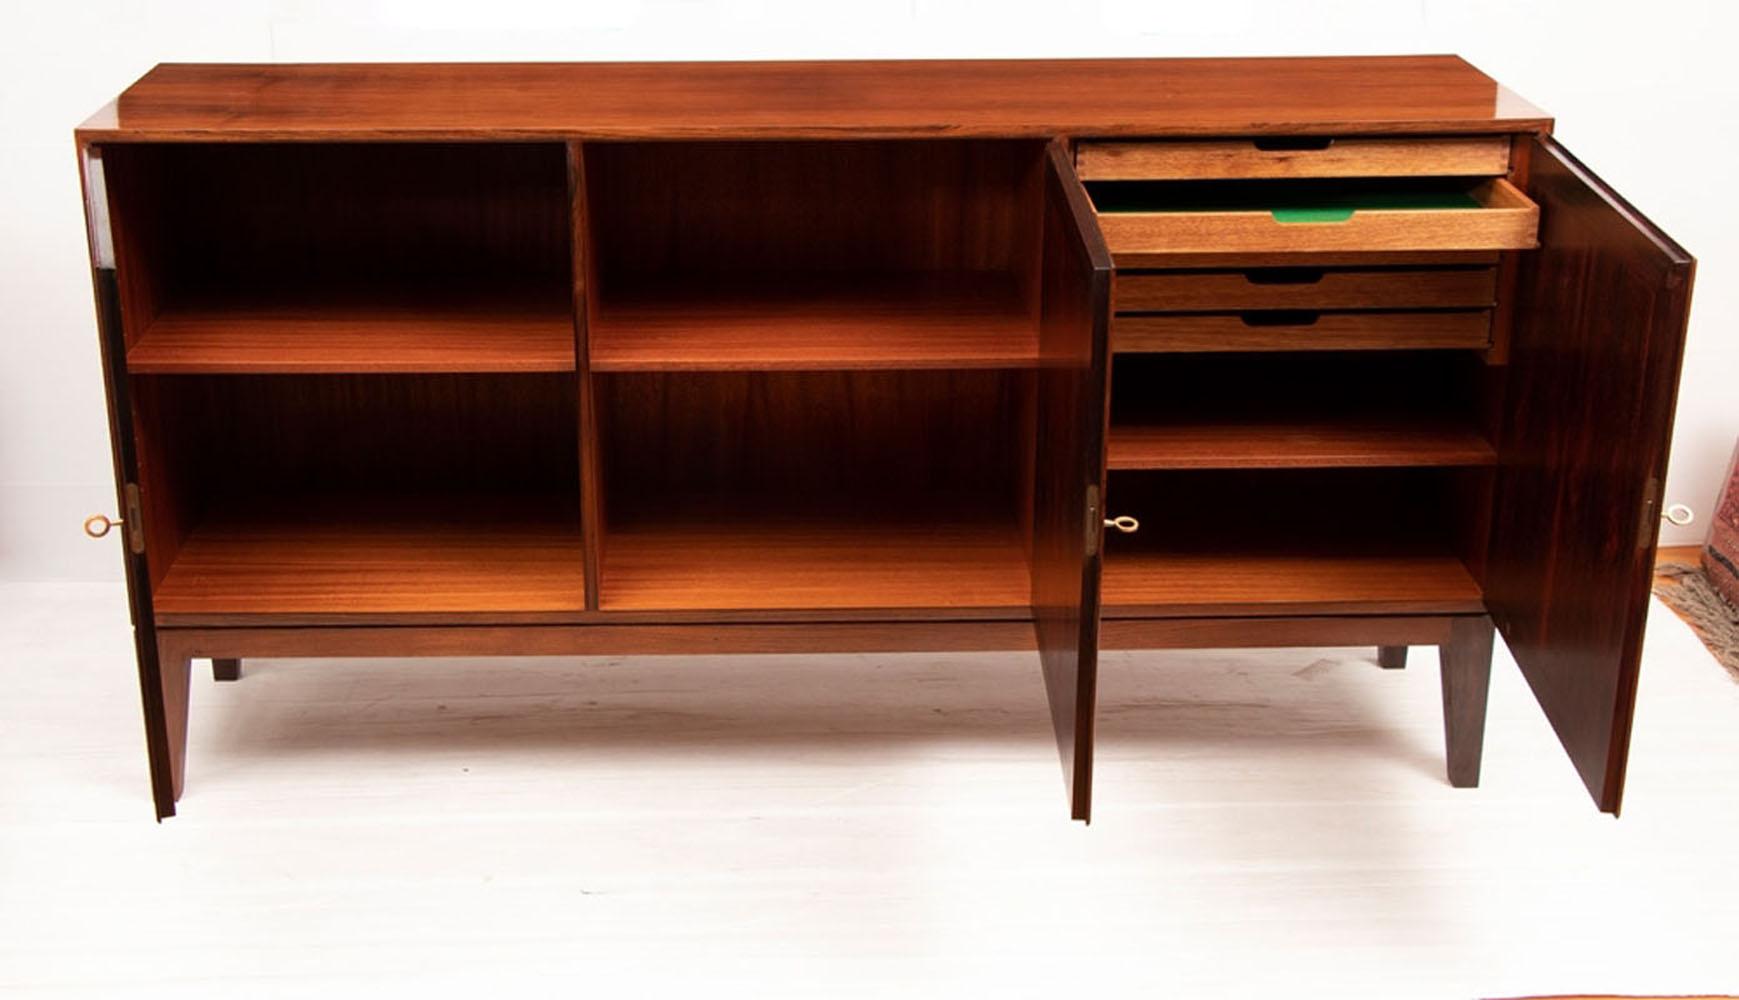 Danish midcentury Kai Winding sideboard by Poul Jeppesen, circa 1960.
This sideboard has been polished and is imaculate as per the photos. It is absolutely beautiful.

A Classic design by Poul Jeppesen, circa 1960.